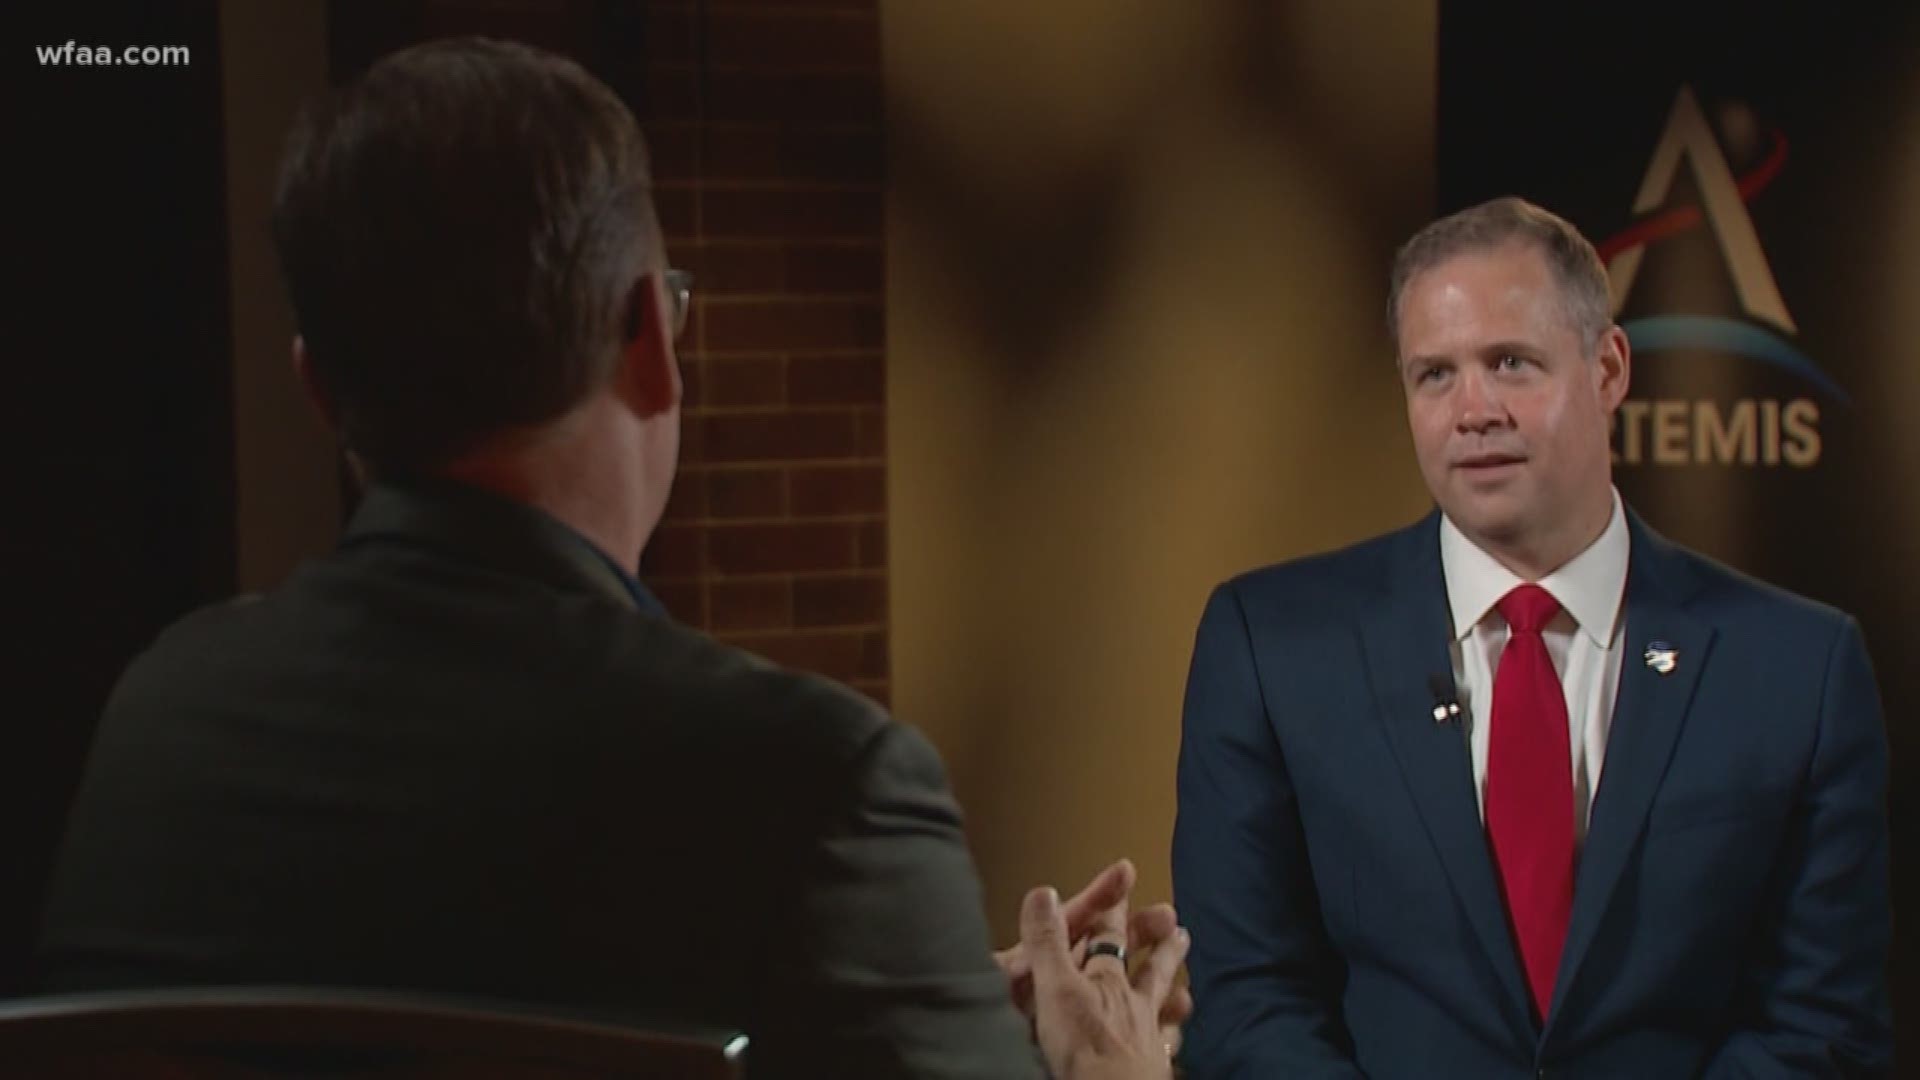 Jim Bridenstine says he has bi-partisan support for the science-driven march to get men and women to the moon by 2024. Bridenstine, a former Naval aviator who served three terms in the U.S. House of Representatives for the state of Oklahoma, was appointed NASA Administrator by President Trump in April of 2018.